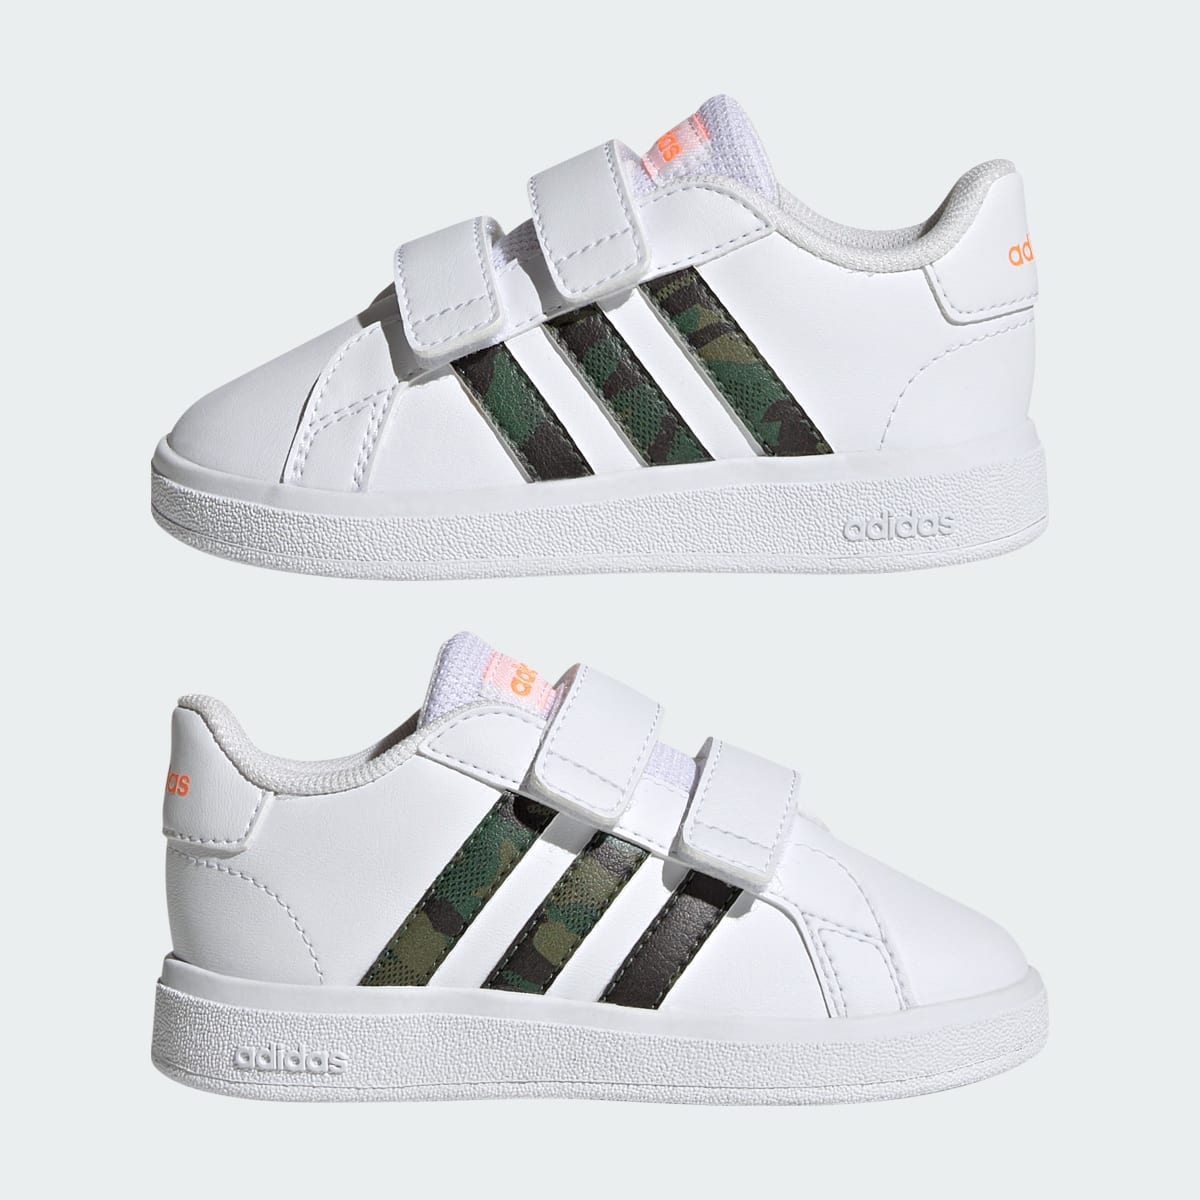 Adidas Grand Court Lifestyle Hook and Loop Schuh. 8